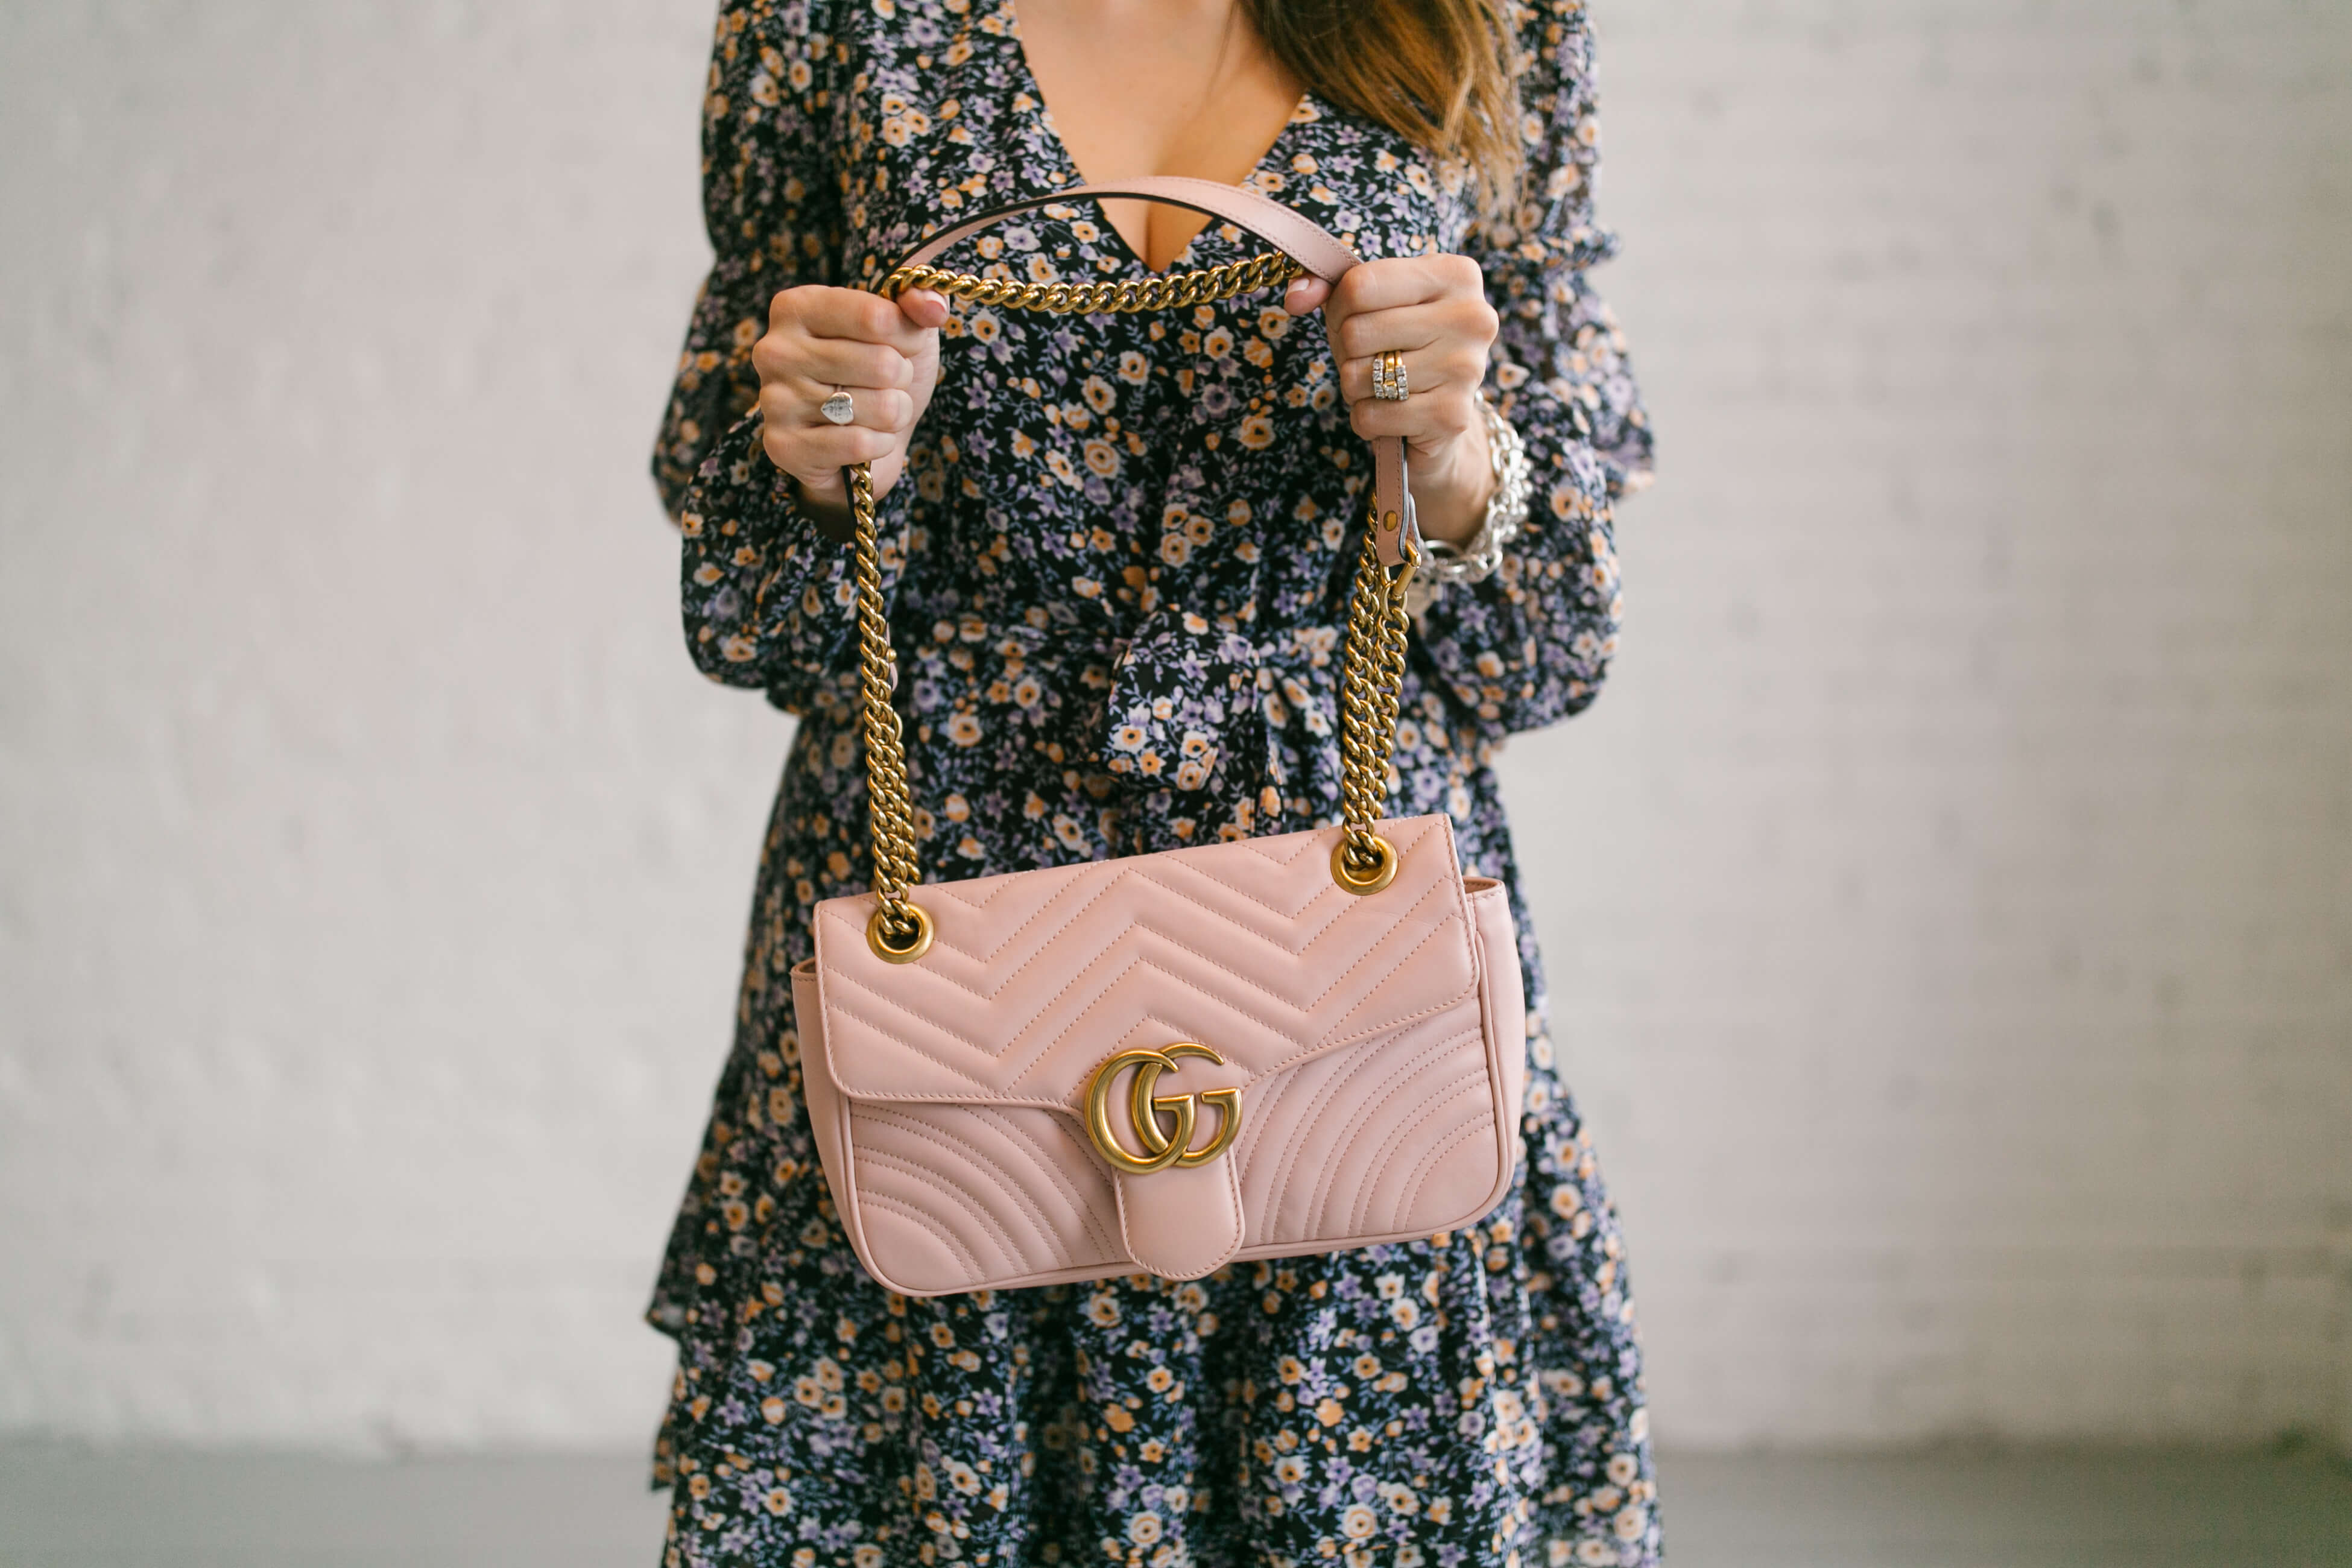 Dynamite Floral Long Sleeve dress, leather jacket, pink Gucci bag; spring style